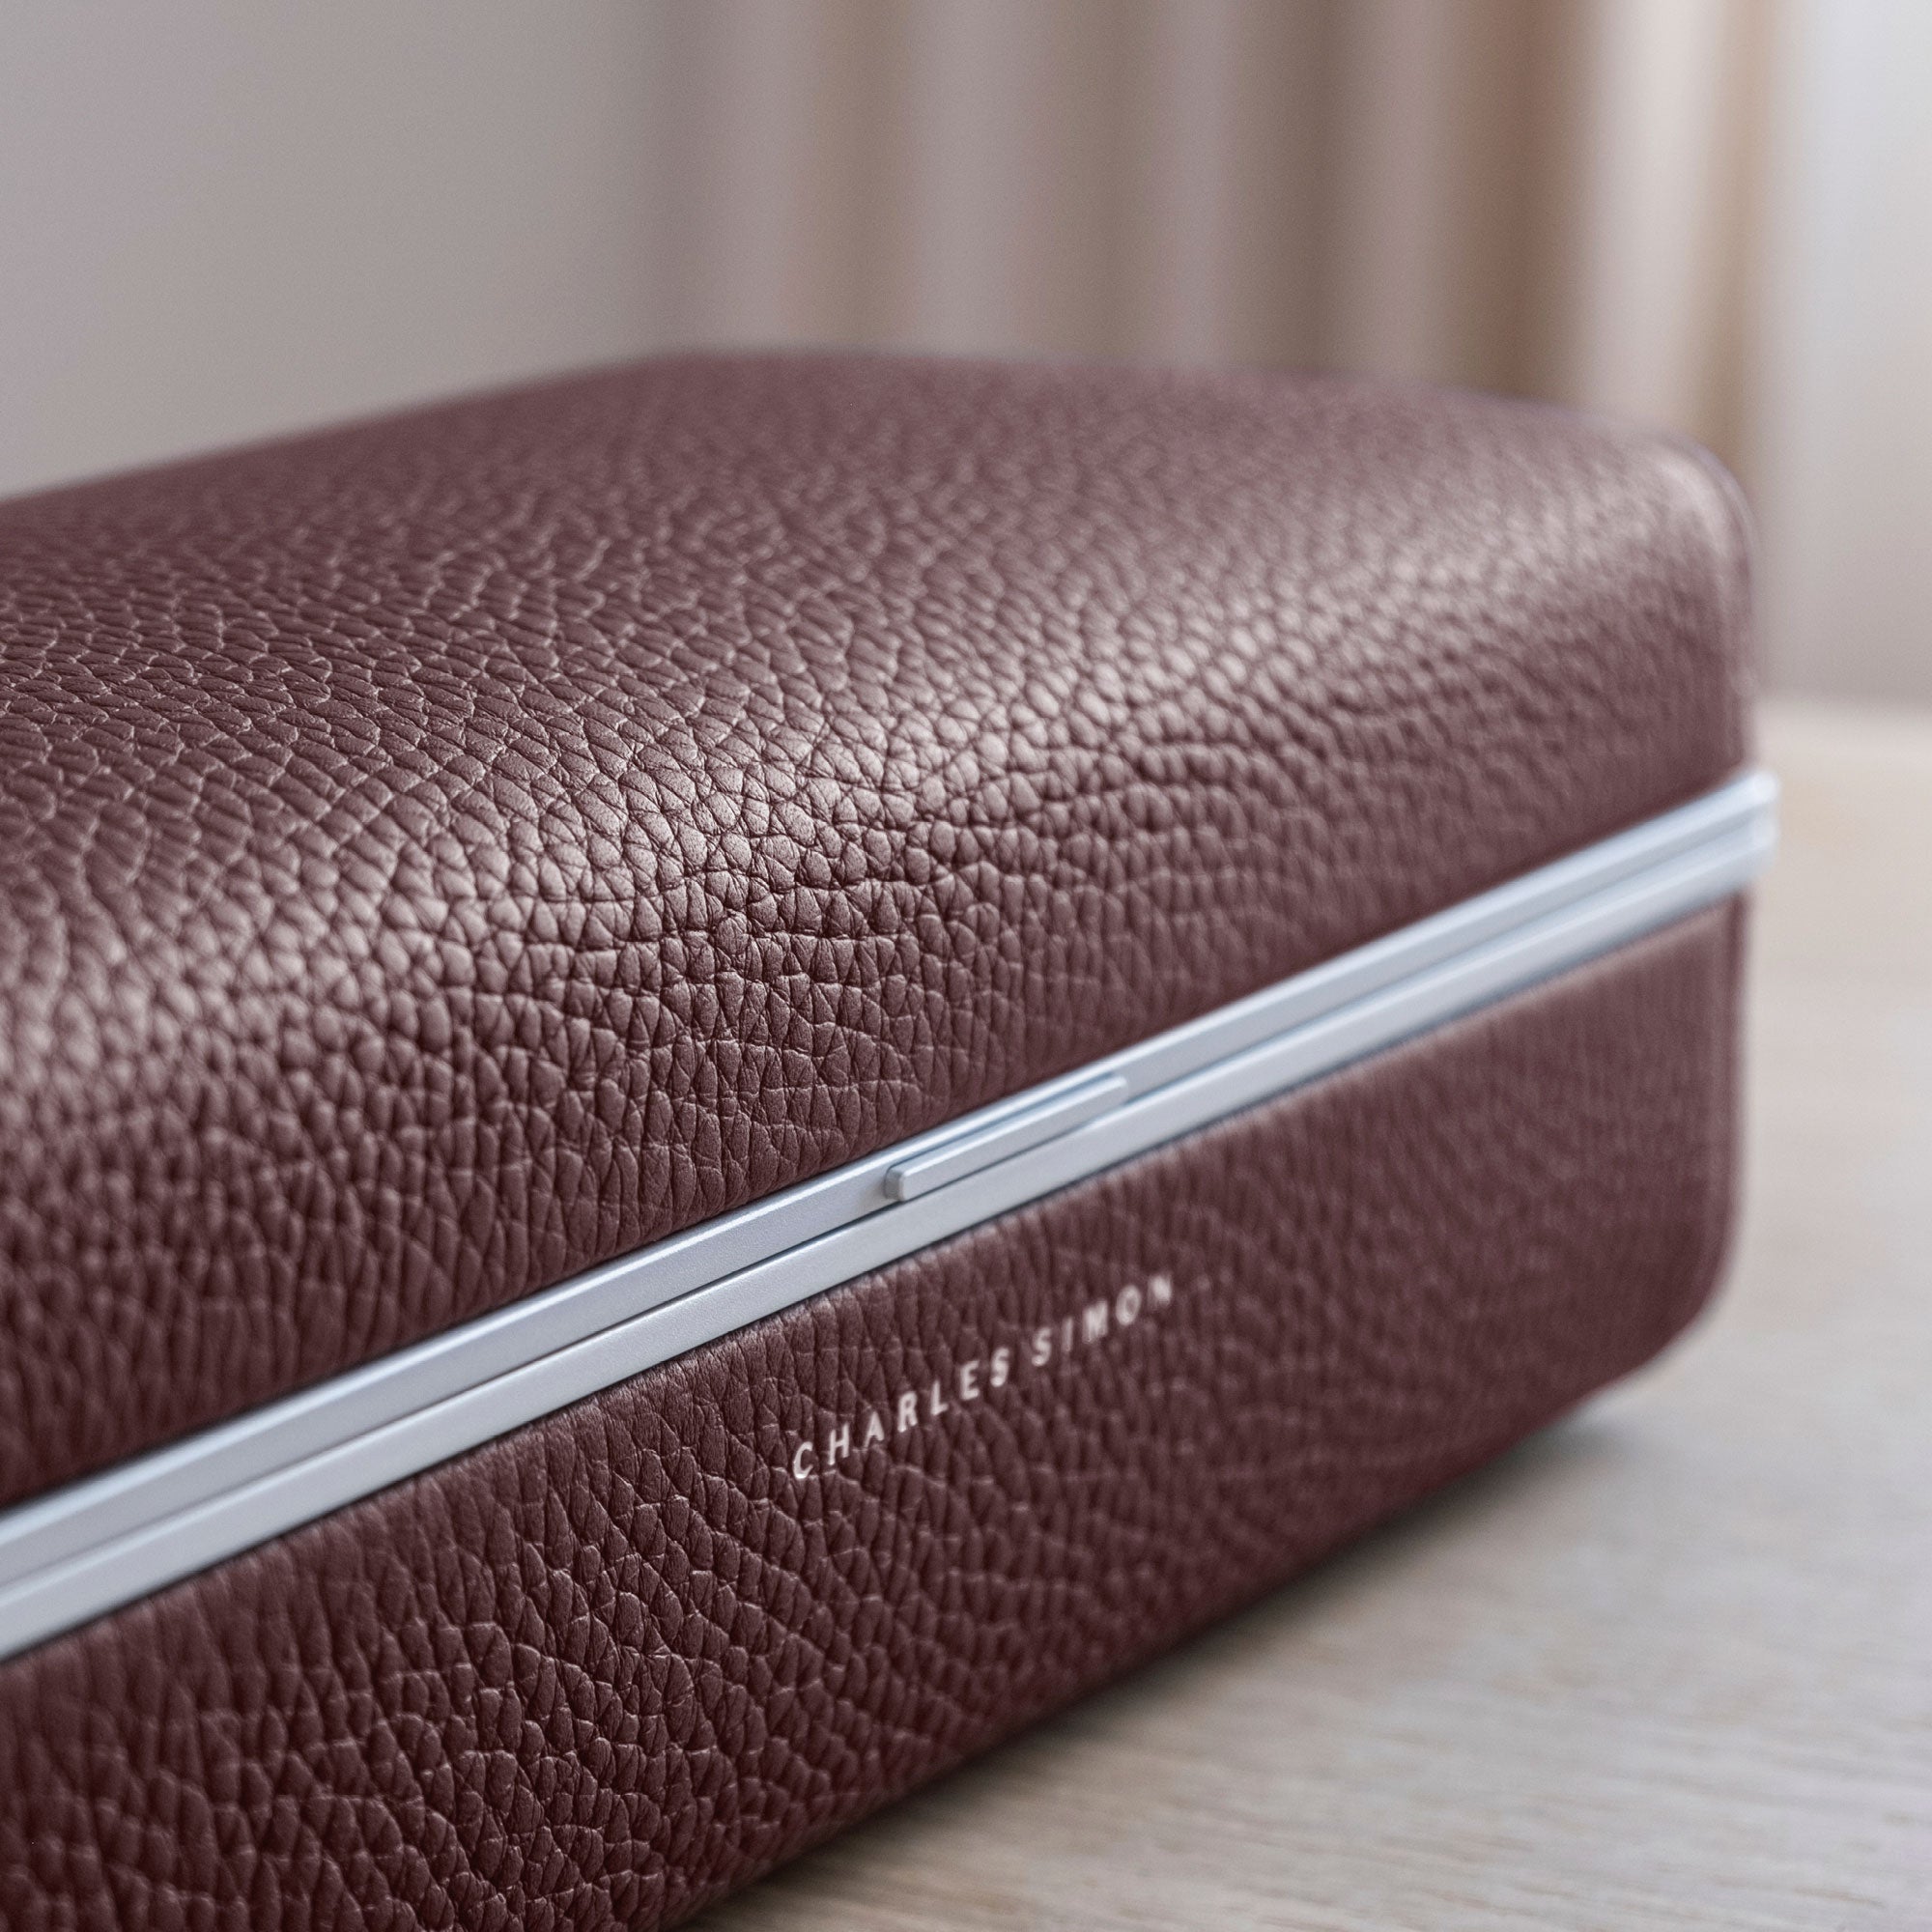 Detail photo of burgundy leather on the Eaton 3 Watch case by Charles Simon.